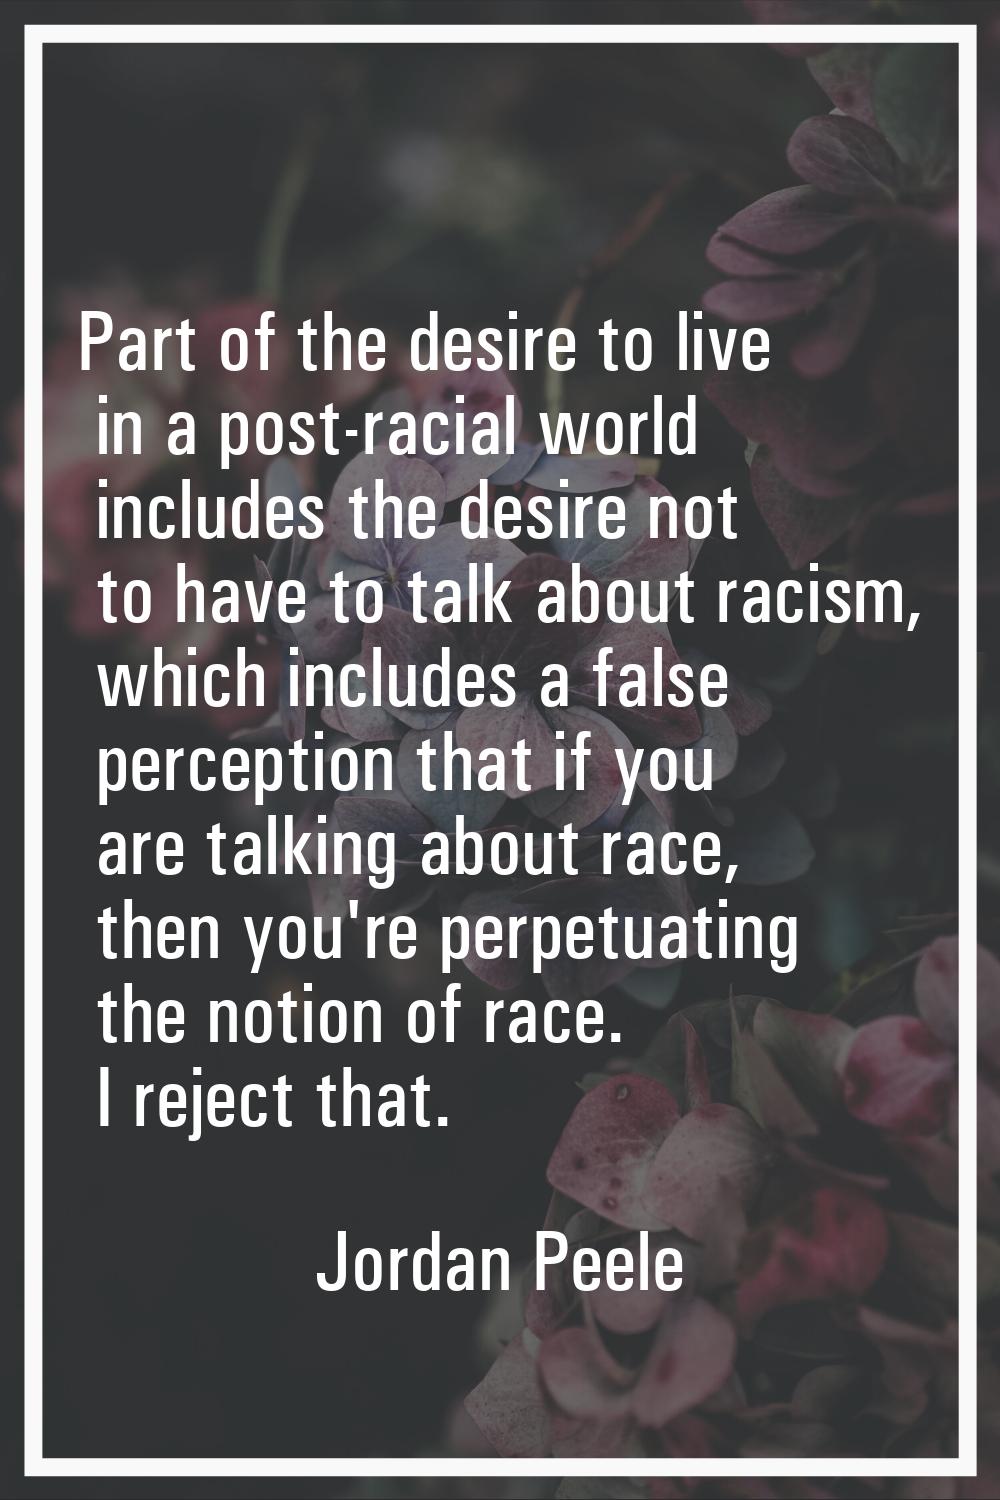 Part of the desire to live in a post-racial world includes the desire not to have to talk about rac